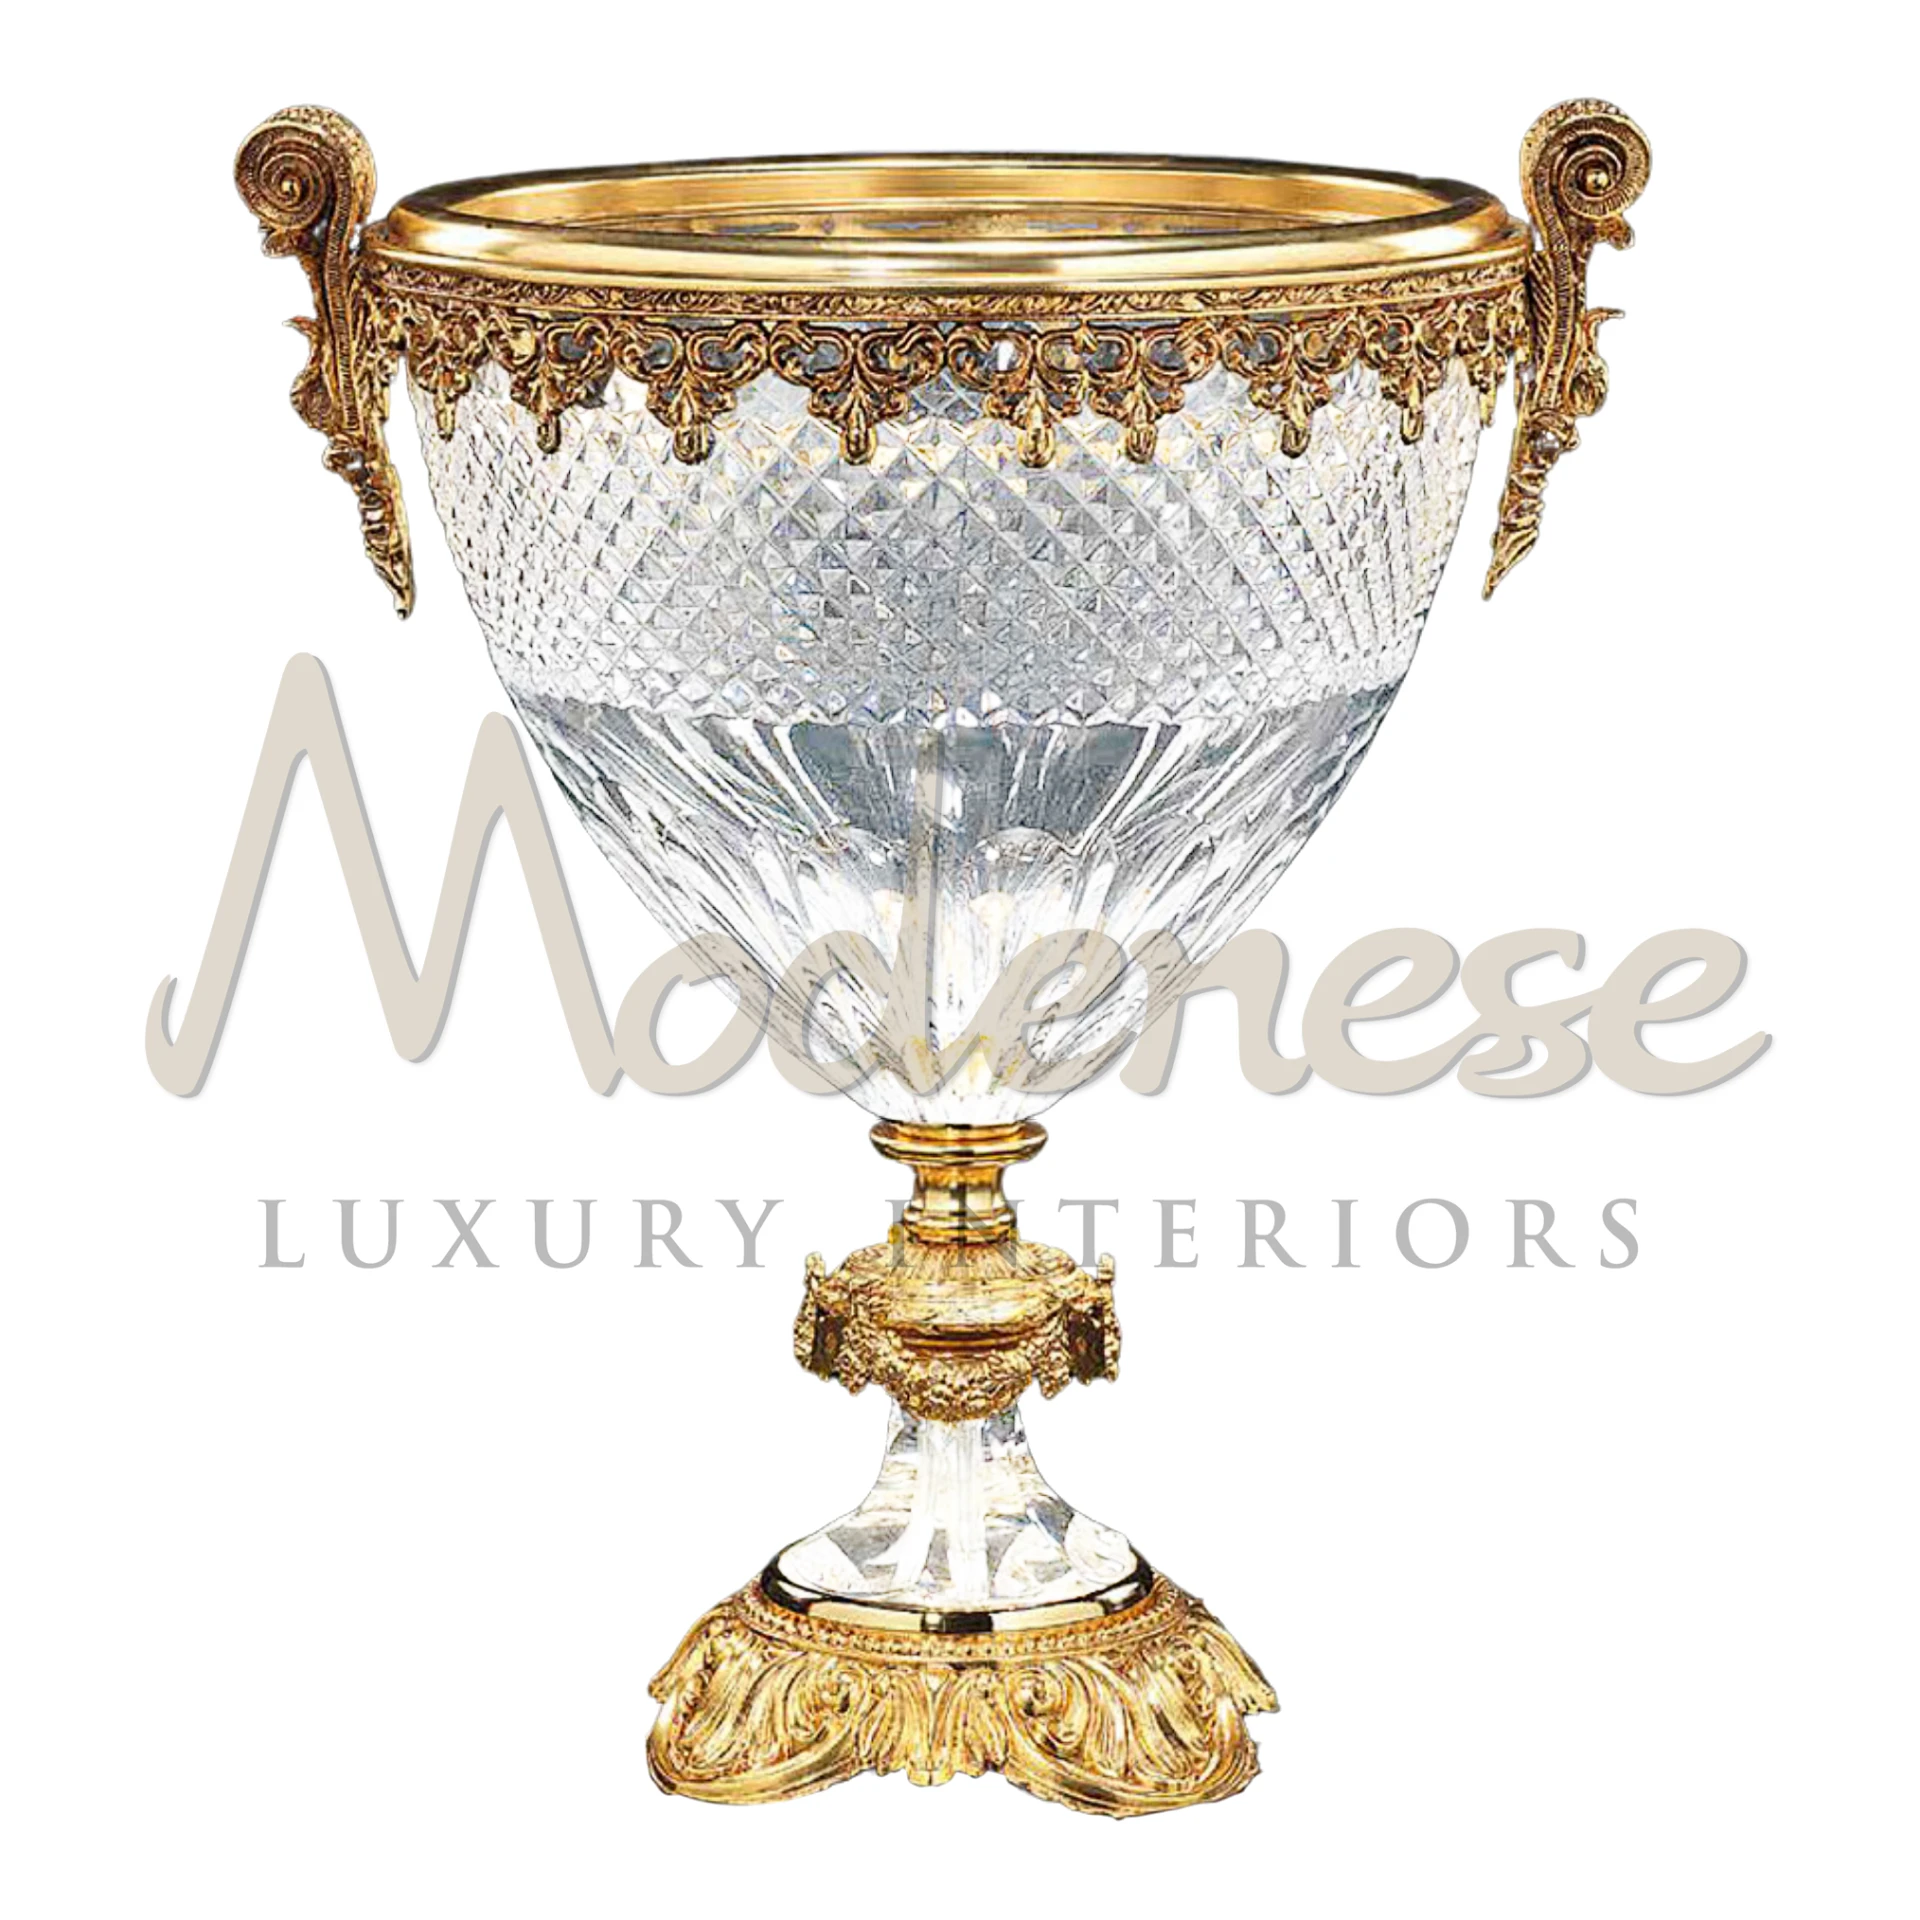 Classical Gold Elements Bowl, perfect for adding elegance and glamour, whether as a serving dish or a decorative centerpiece.